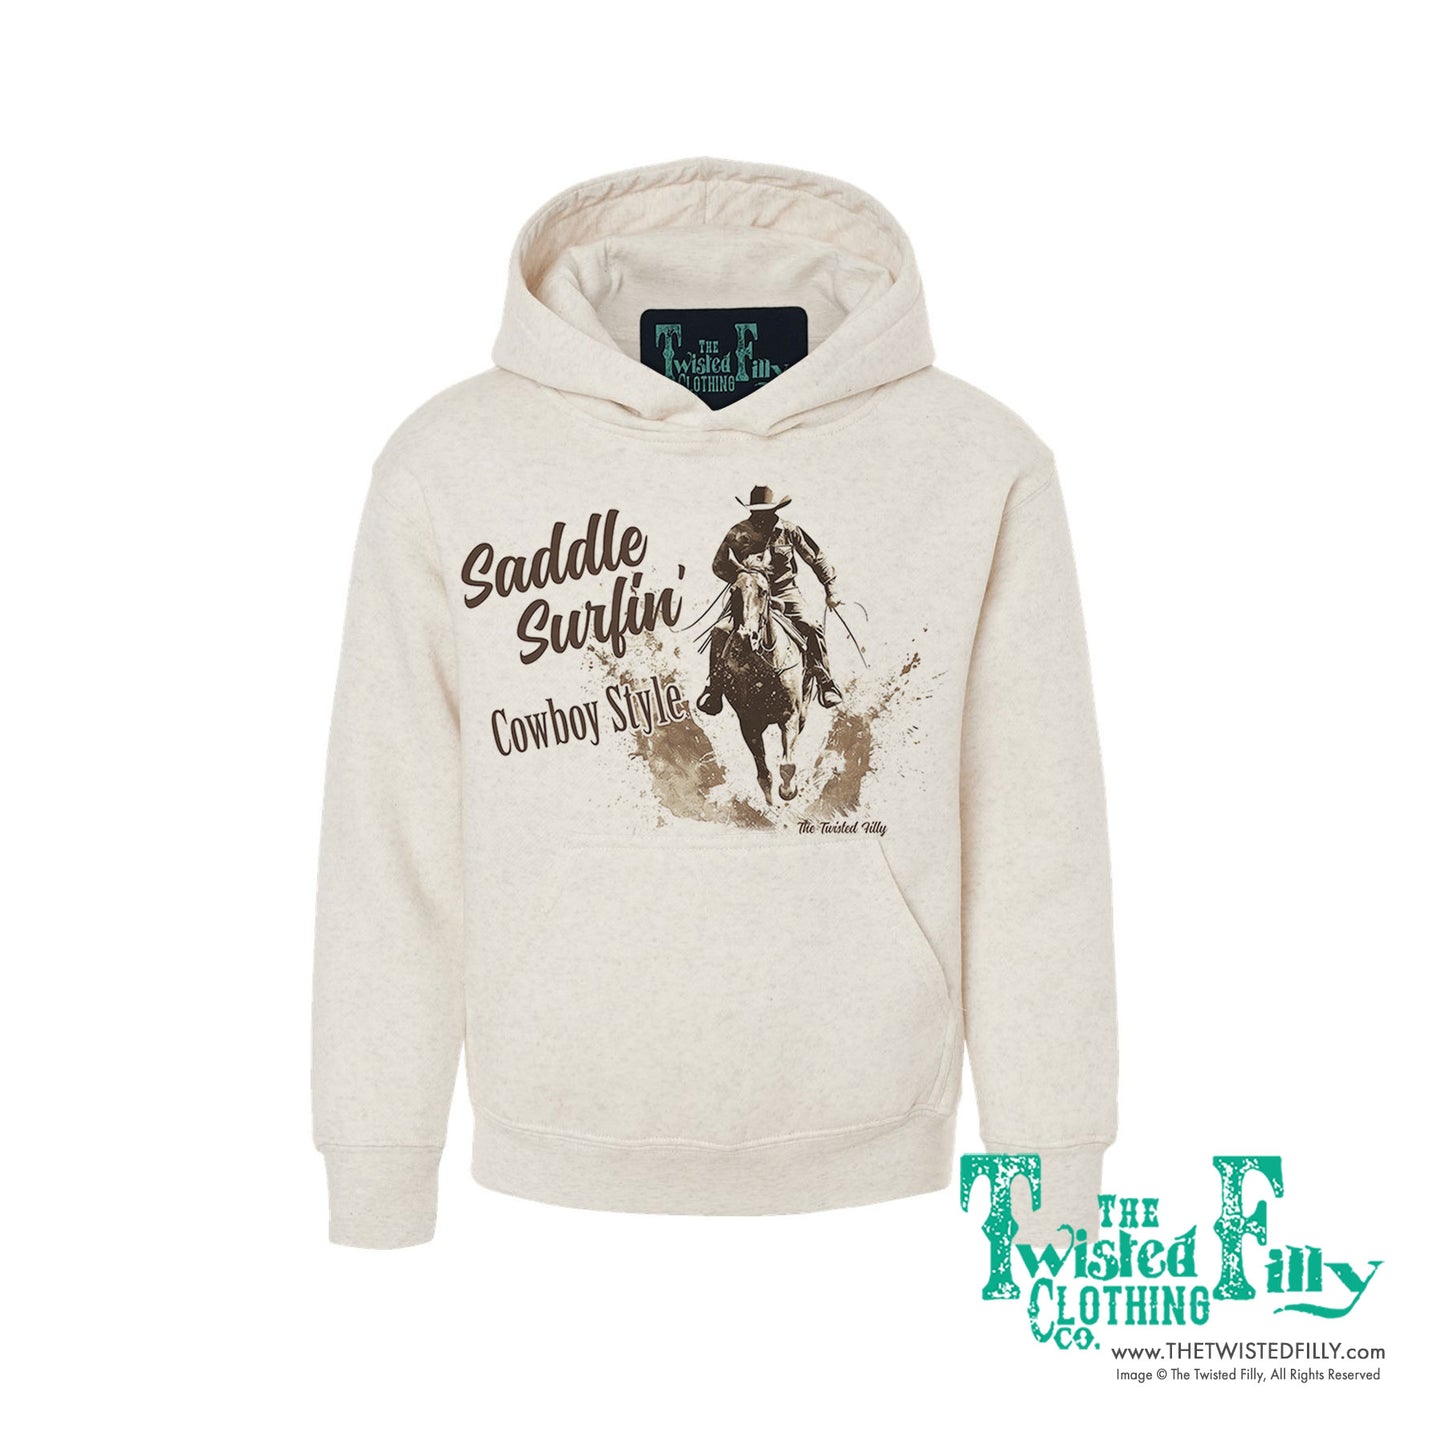 Saddle Surfin' Cowboy Style - Youth Boys Hoodie - Assorted Colors